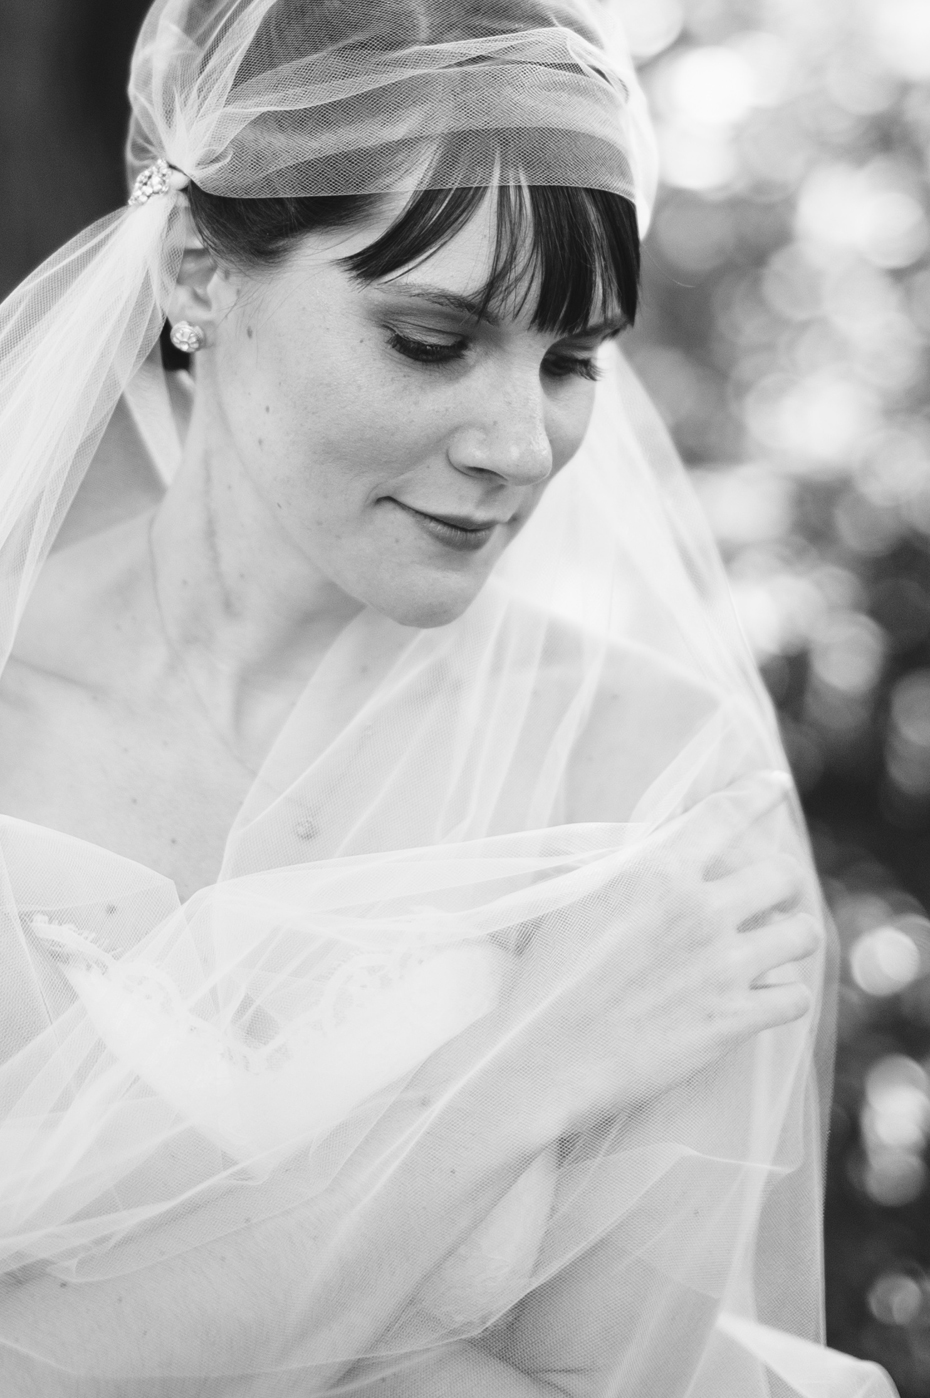 Black and white Bridal portraits with a bride wearing a vintage styled veil by Ann Arbor Michigan wedding photographer, Heather Jowett.